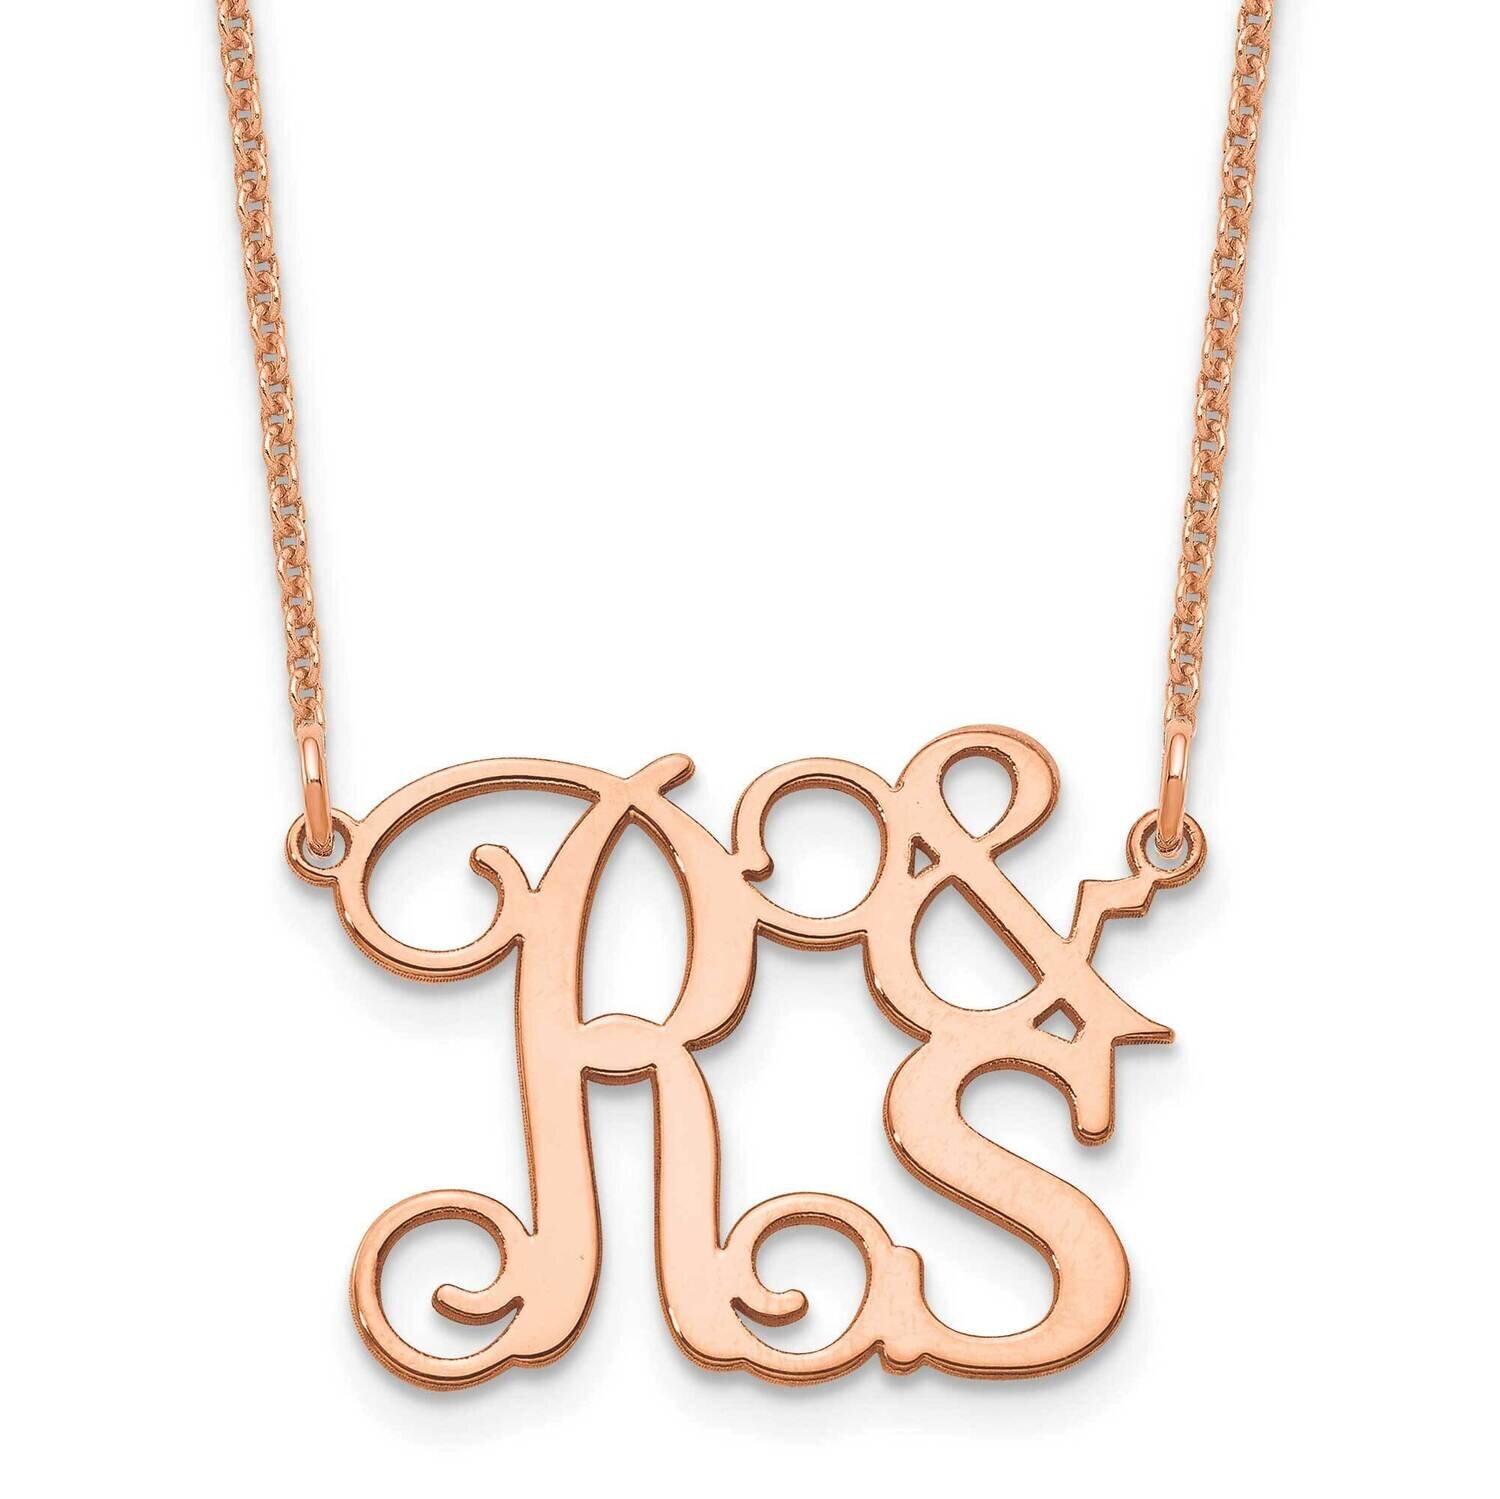 Stacked Initials Necklace 14k Rose Gold XNA901R